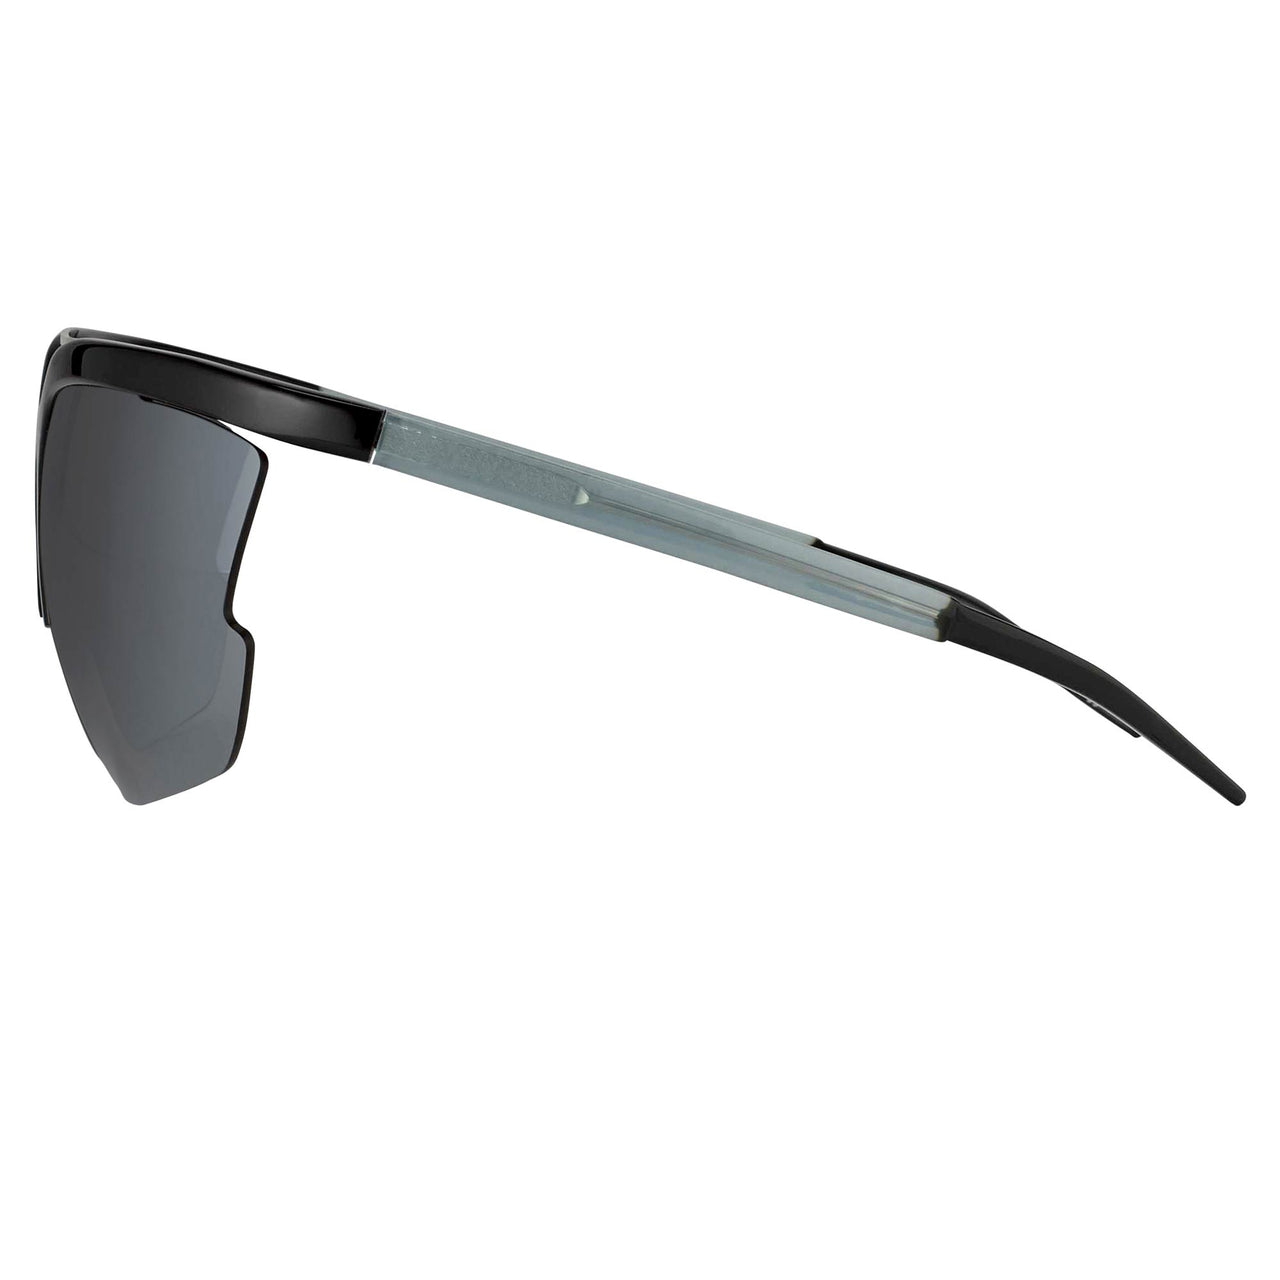 Prabal Gurung Sunglasses Female Special Frame Shiny Black Category 3 Grey Mirror Lenses PG21C5SUN - Watches & Crystals